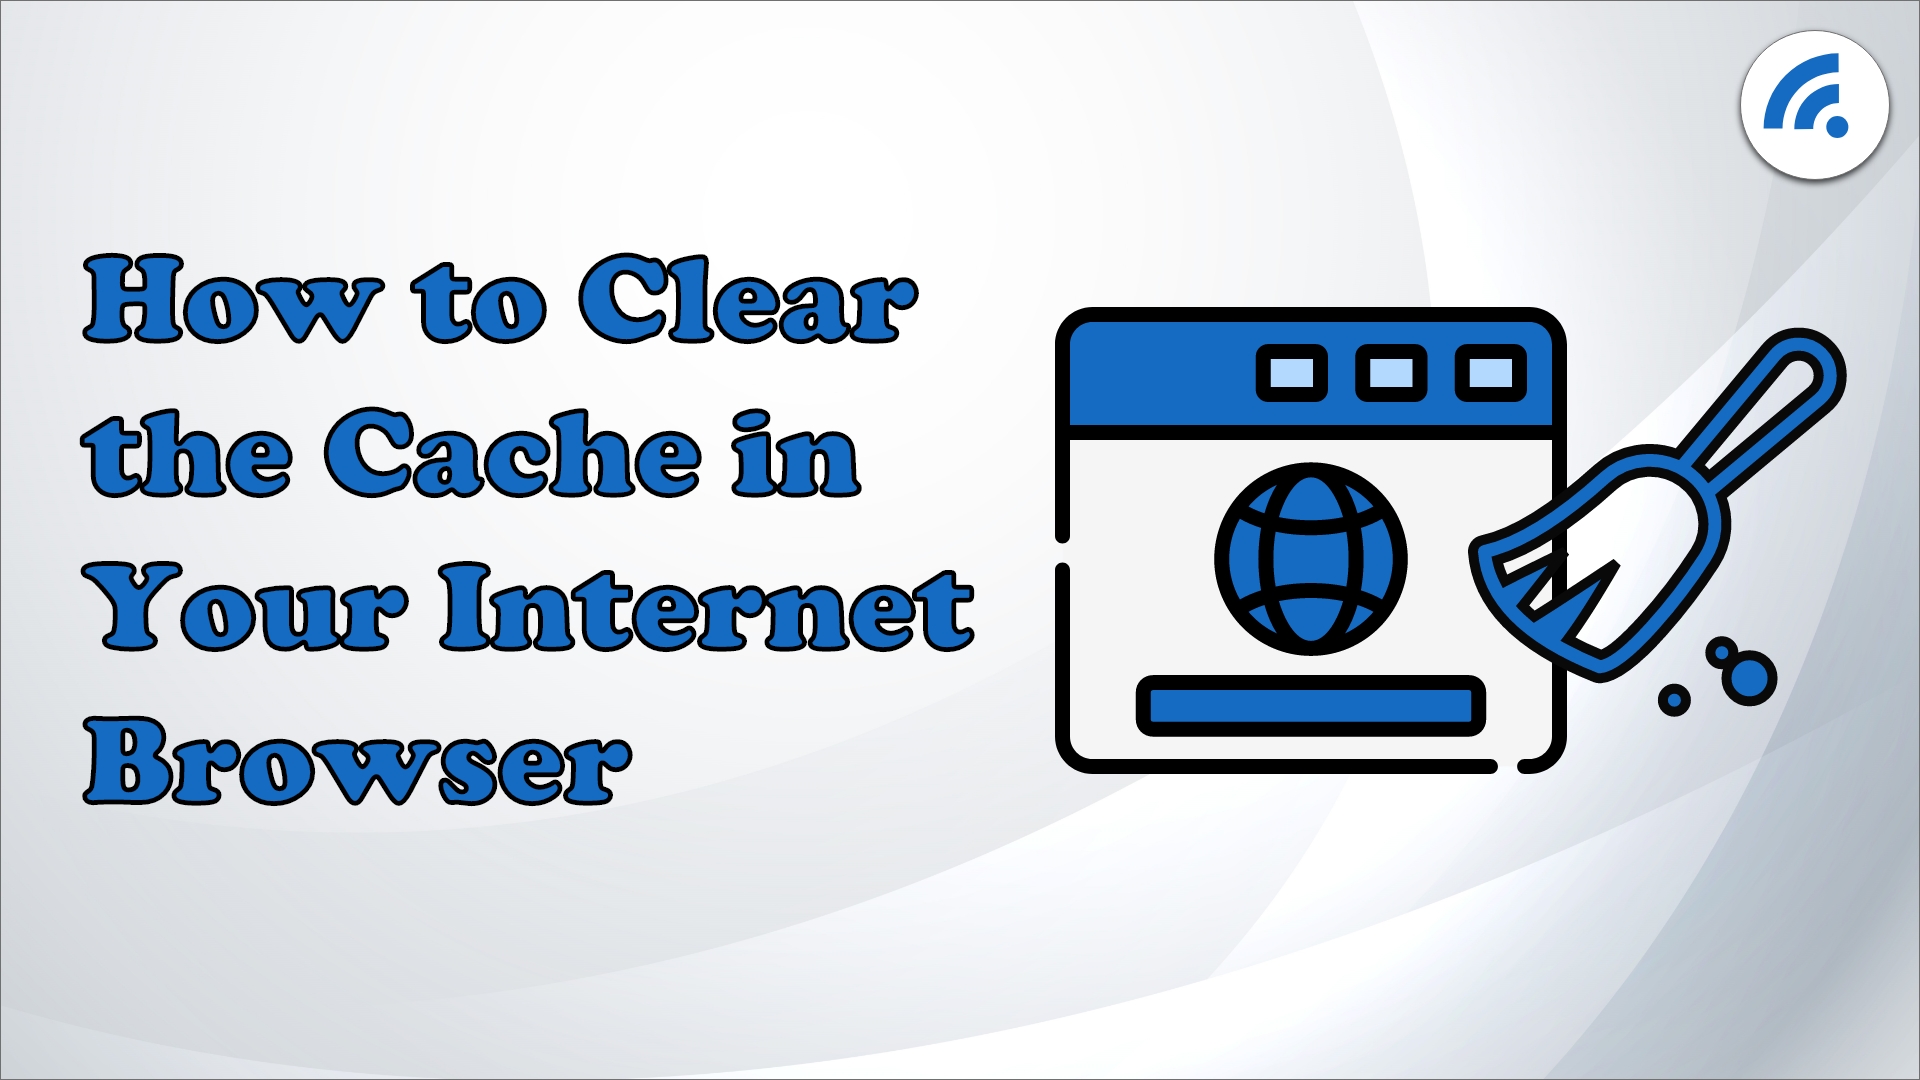 How to Clear the Cache in Your Internet Browser